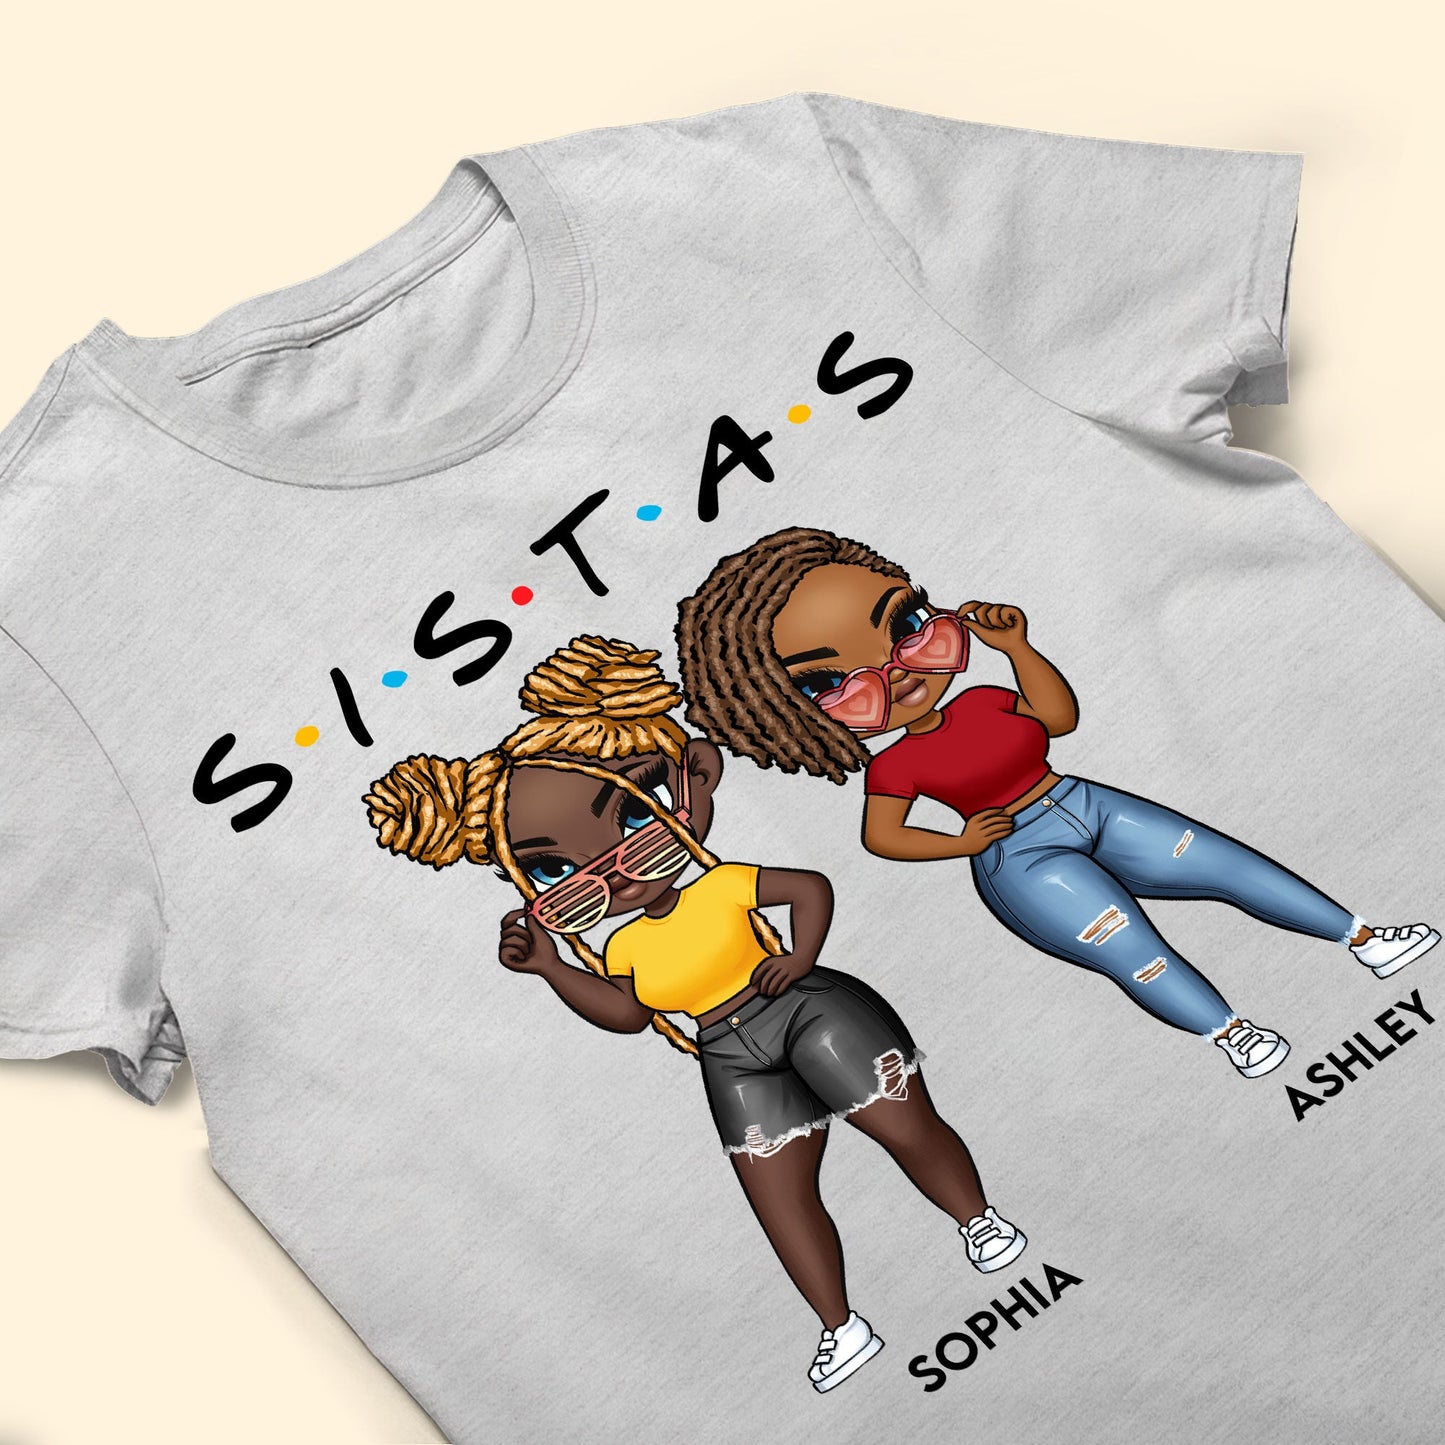 We Are Sistas - Personalized Shirt